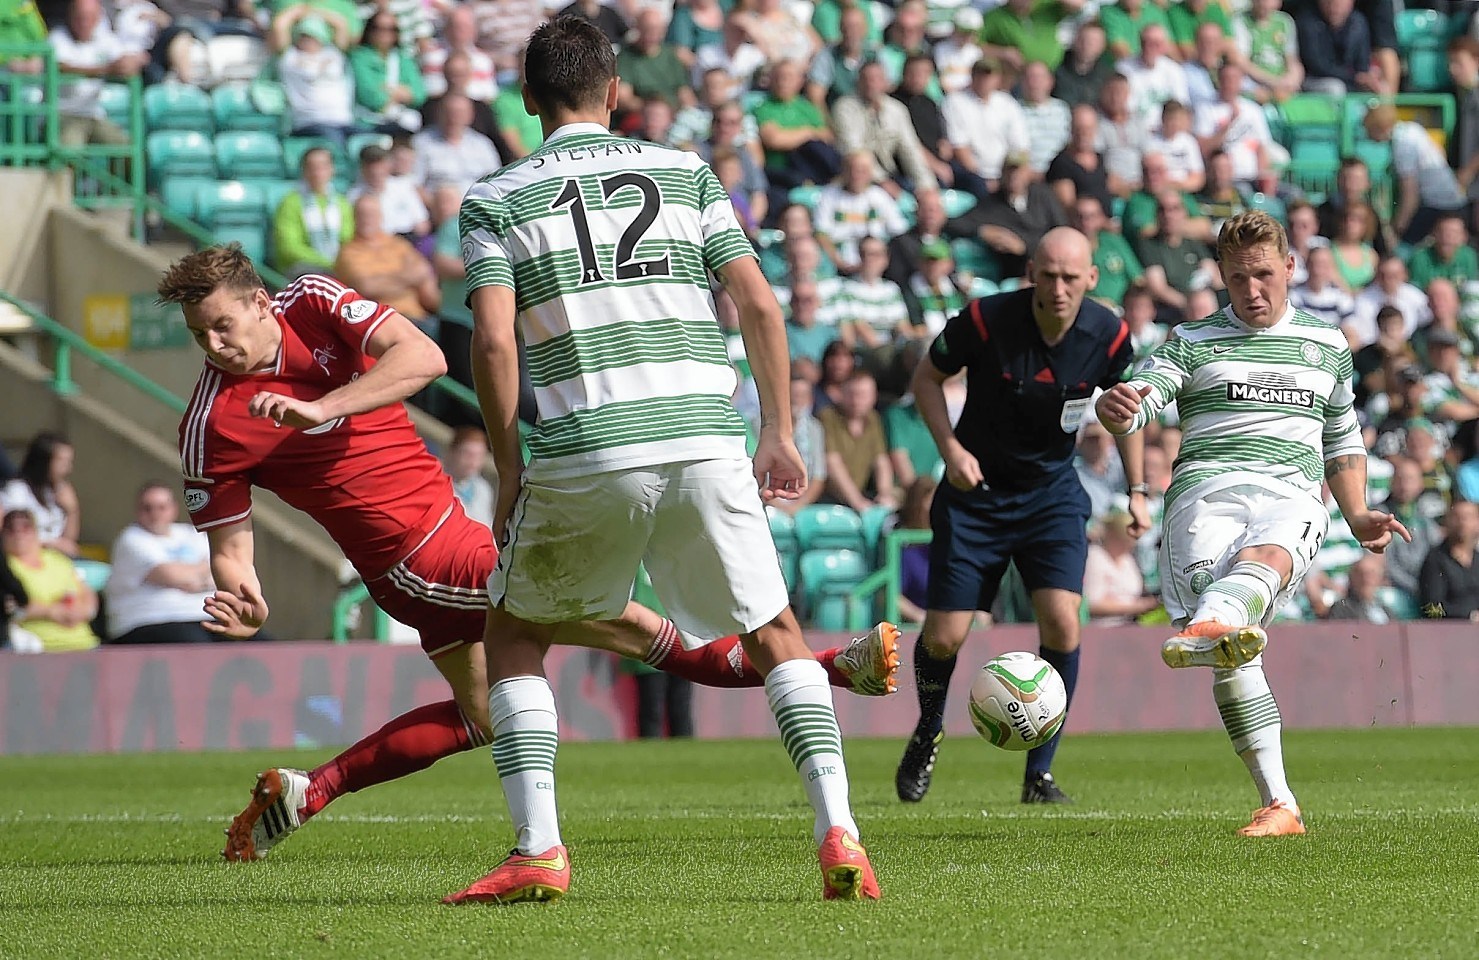 Commons wasted a number of first half chances but was lethal at the start of the second period